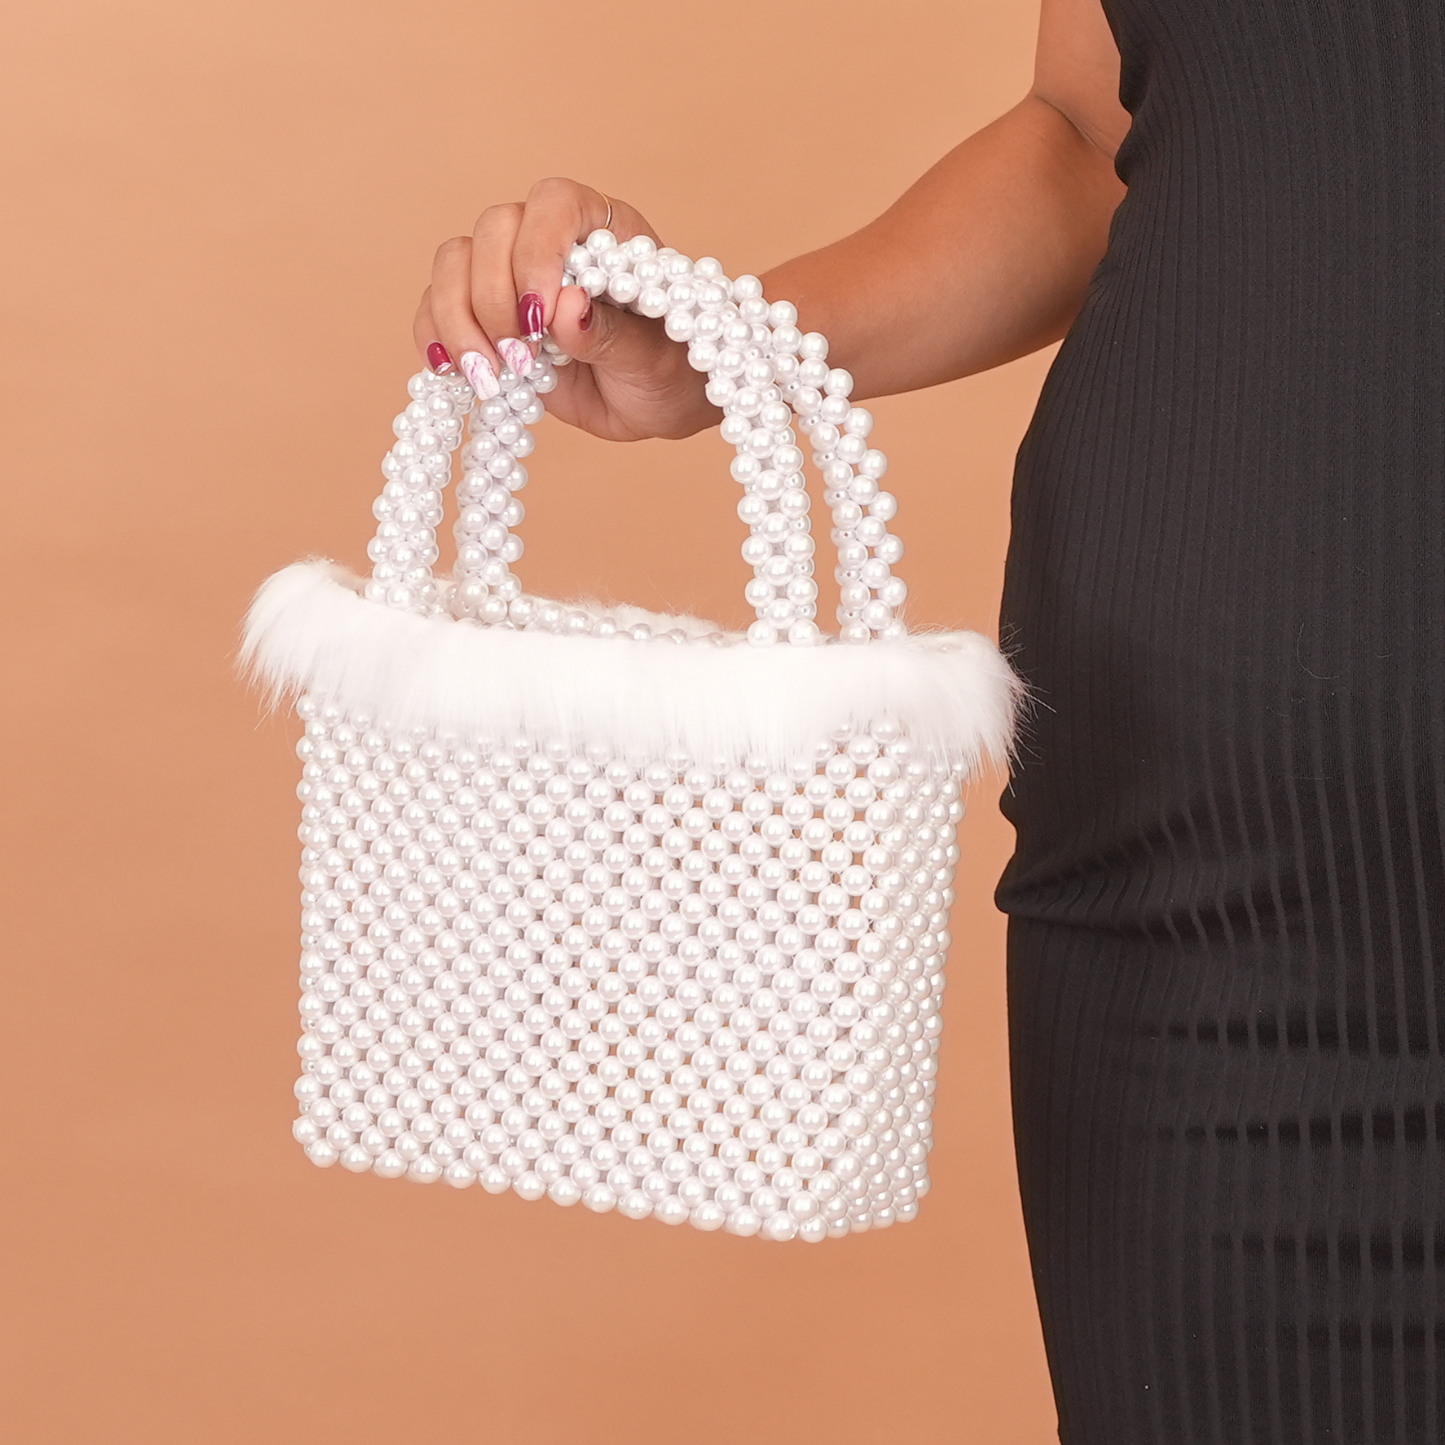 Pearl Elegance: Beaded Square Handbag with White Feather Trim - Timeless Chic